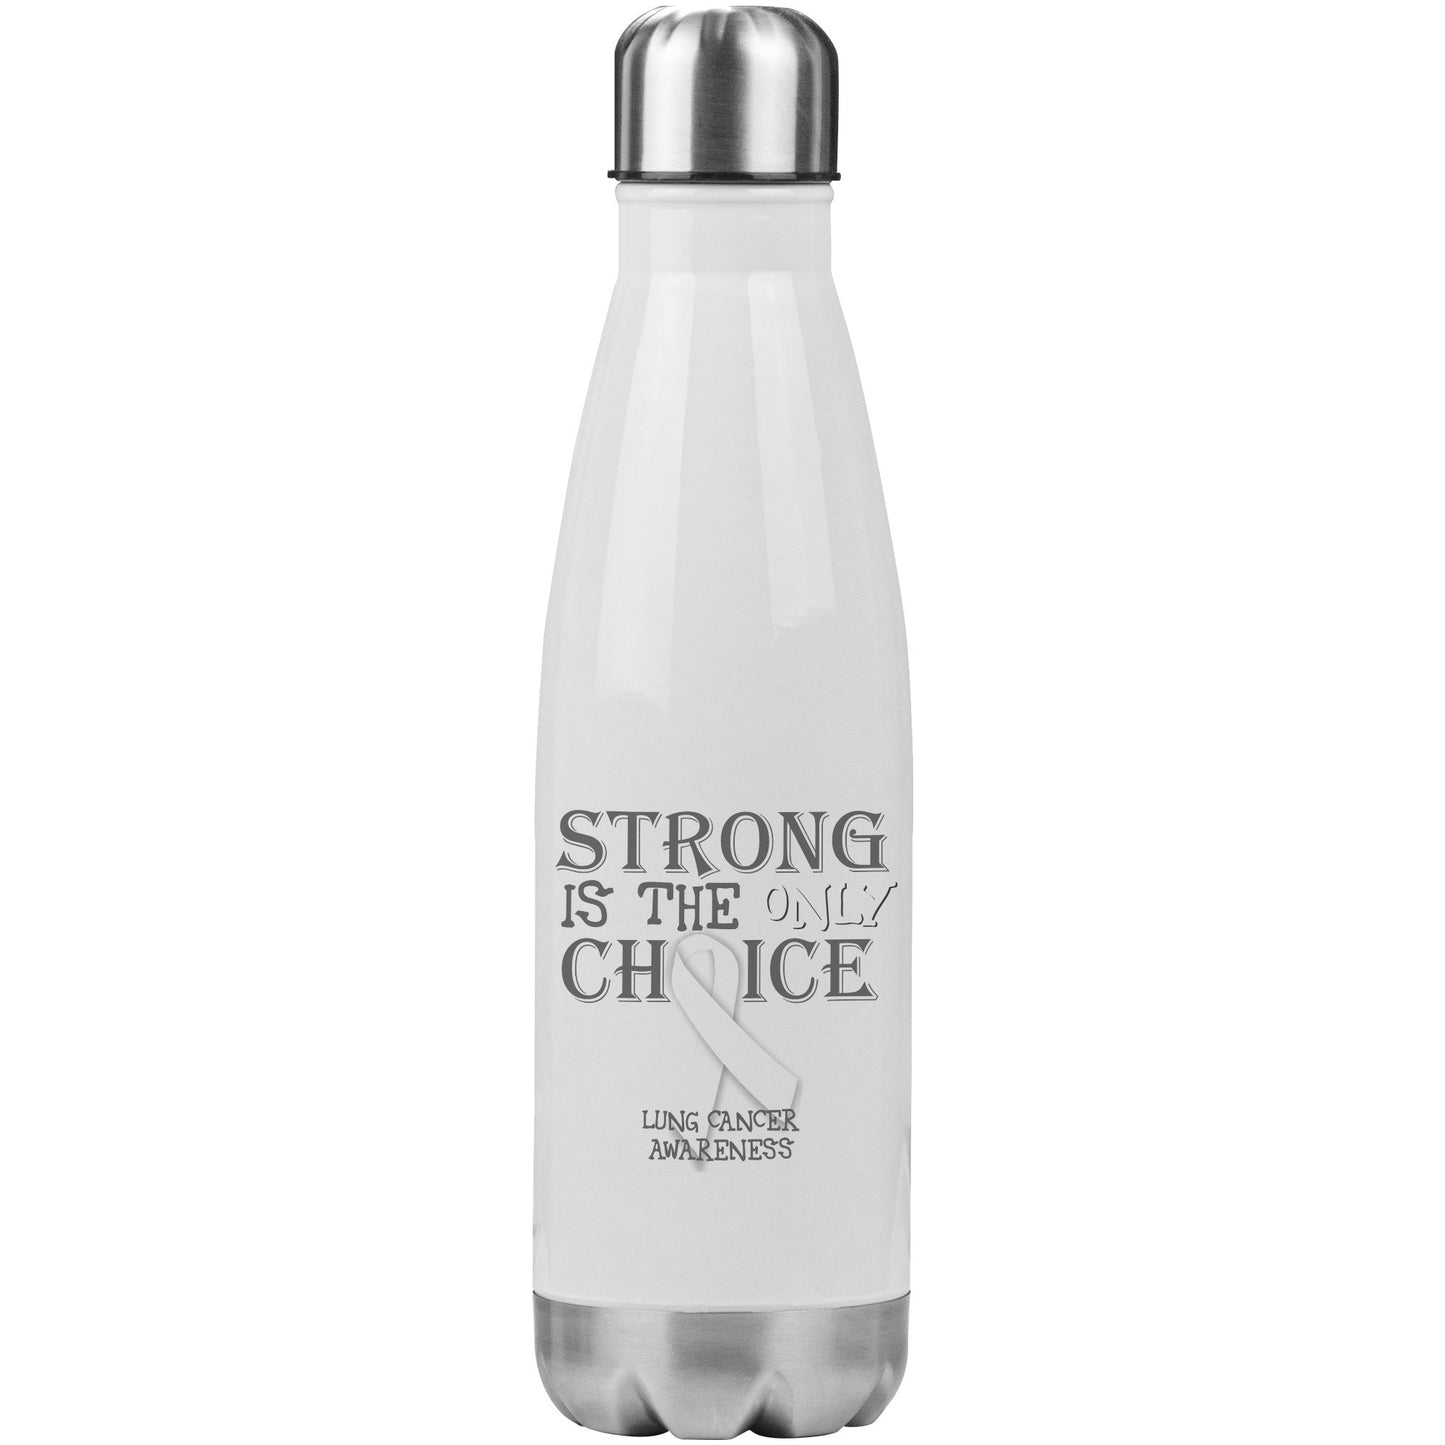 Strong is the Only Choice -Lung Cancer 20oz Insulated Water Bottle |x|